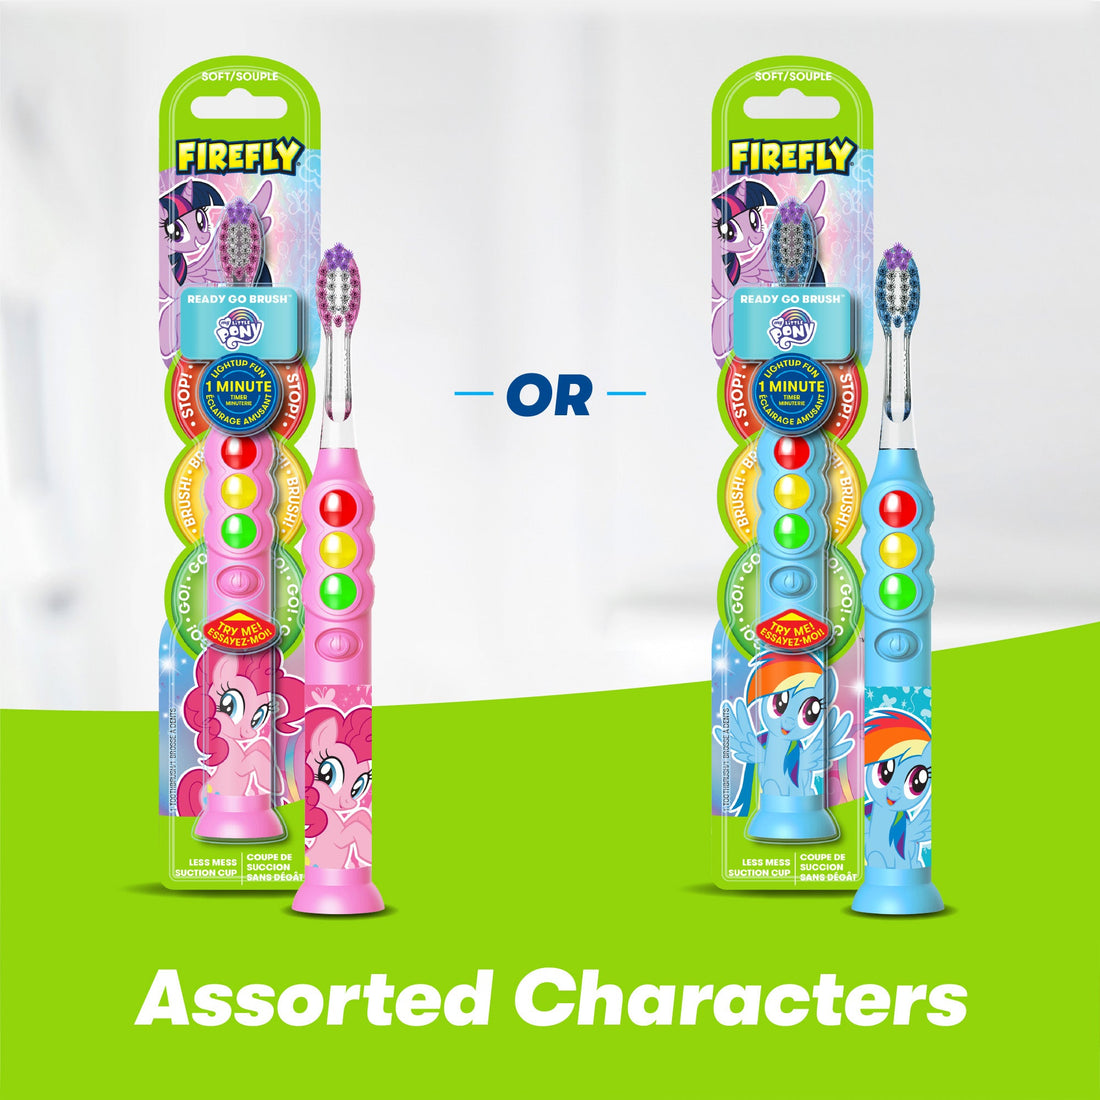 Firefly Ready Go My Little Pony Light Up Timer Toothbrush in blue or pink, assorted characters